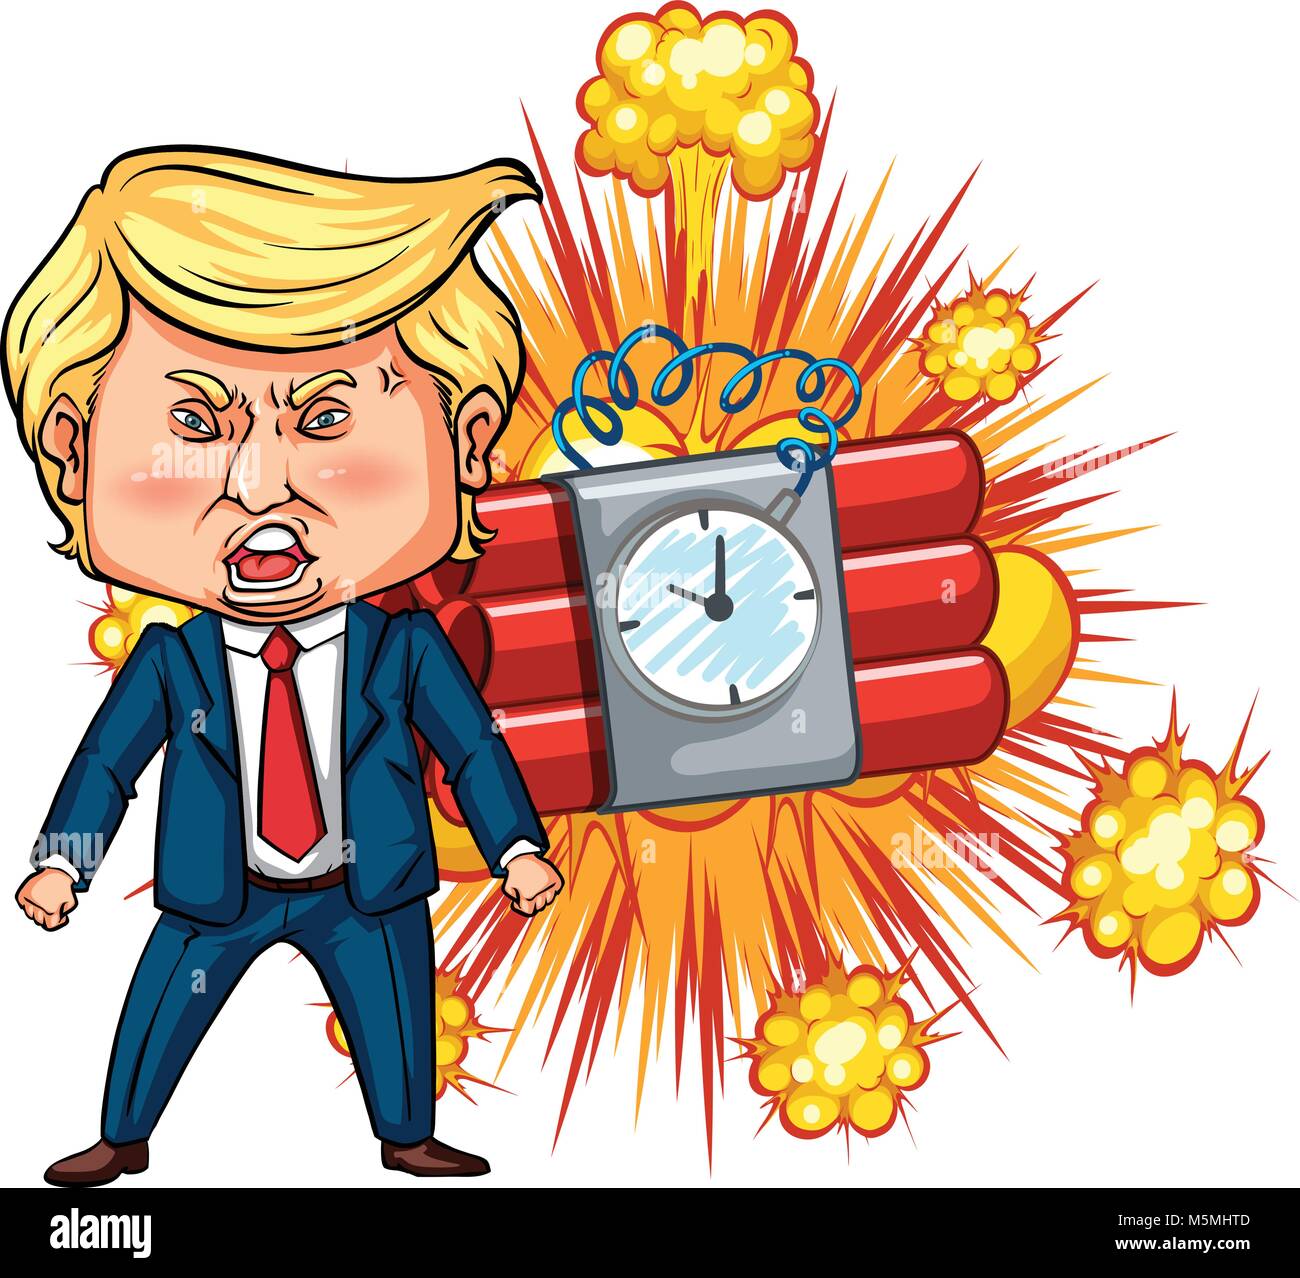 President Trump and time bomb illustration Stock Vector